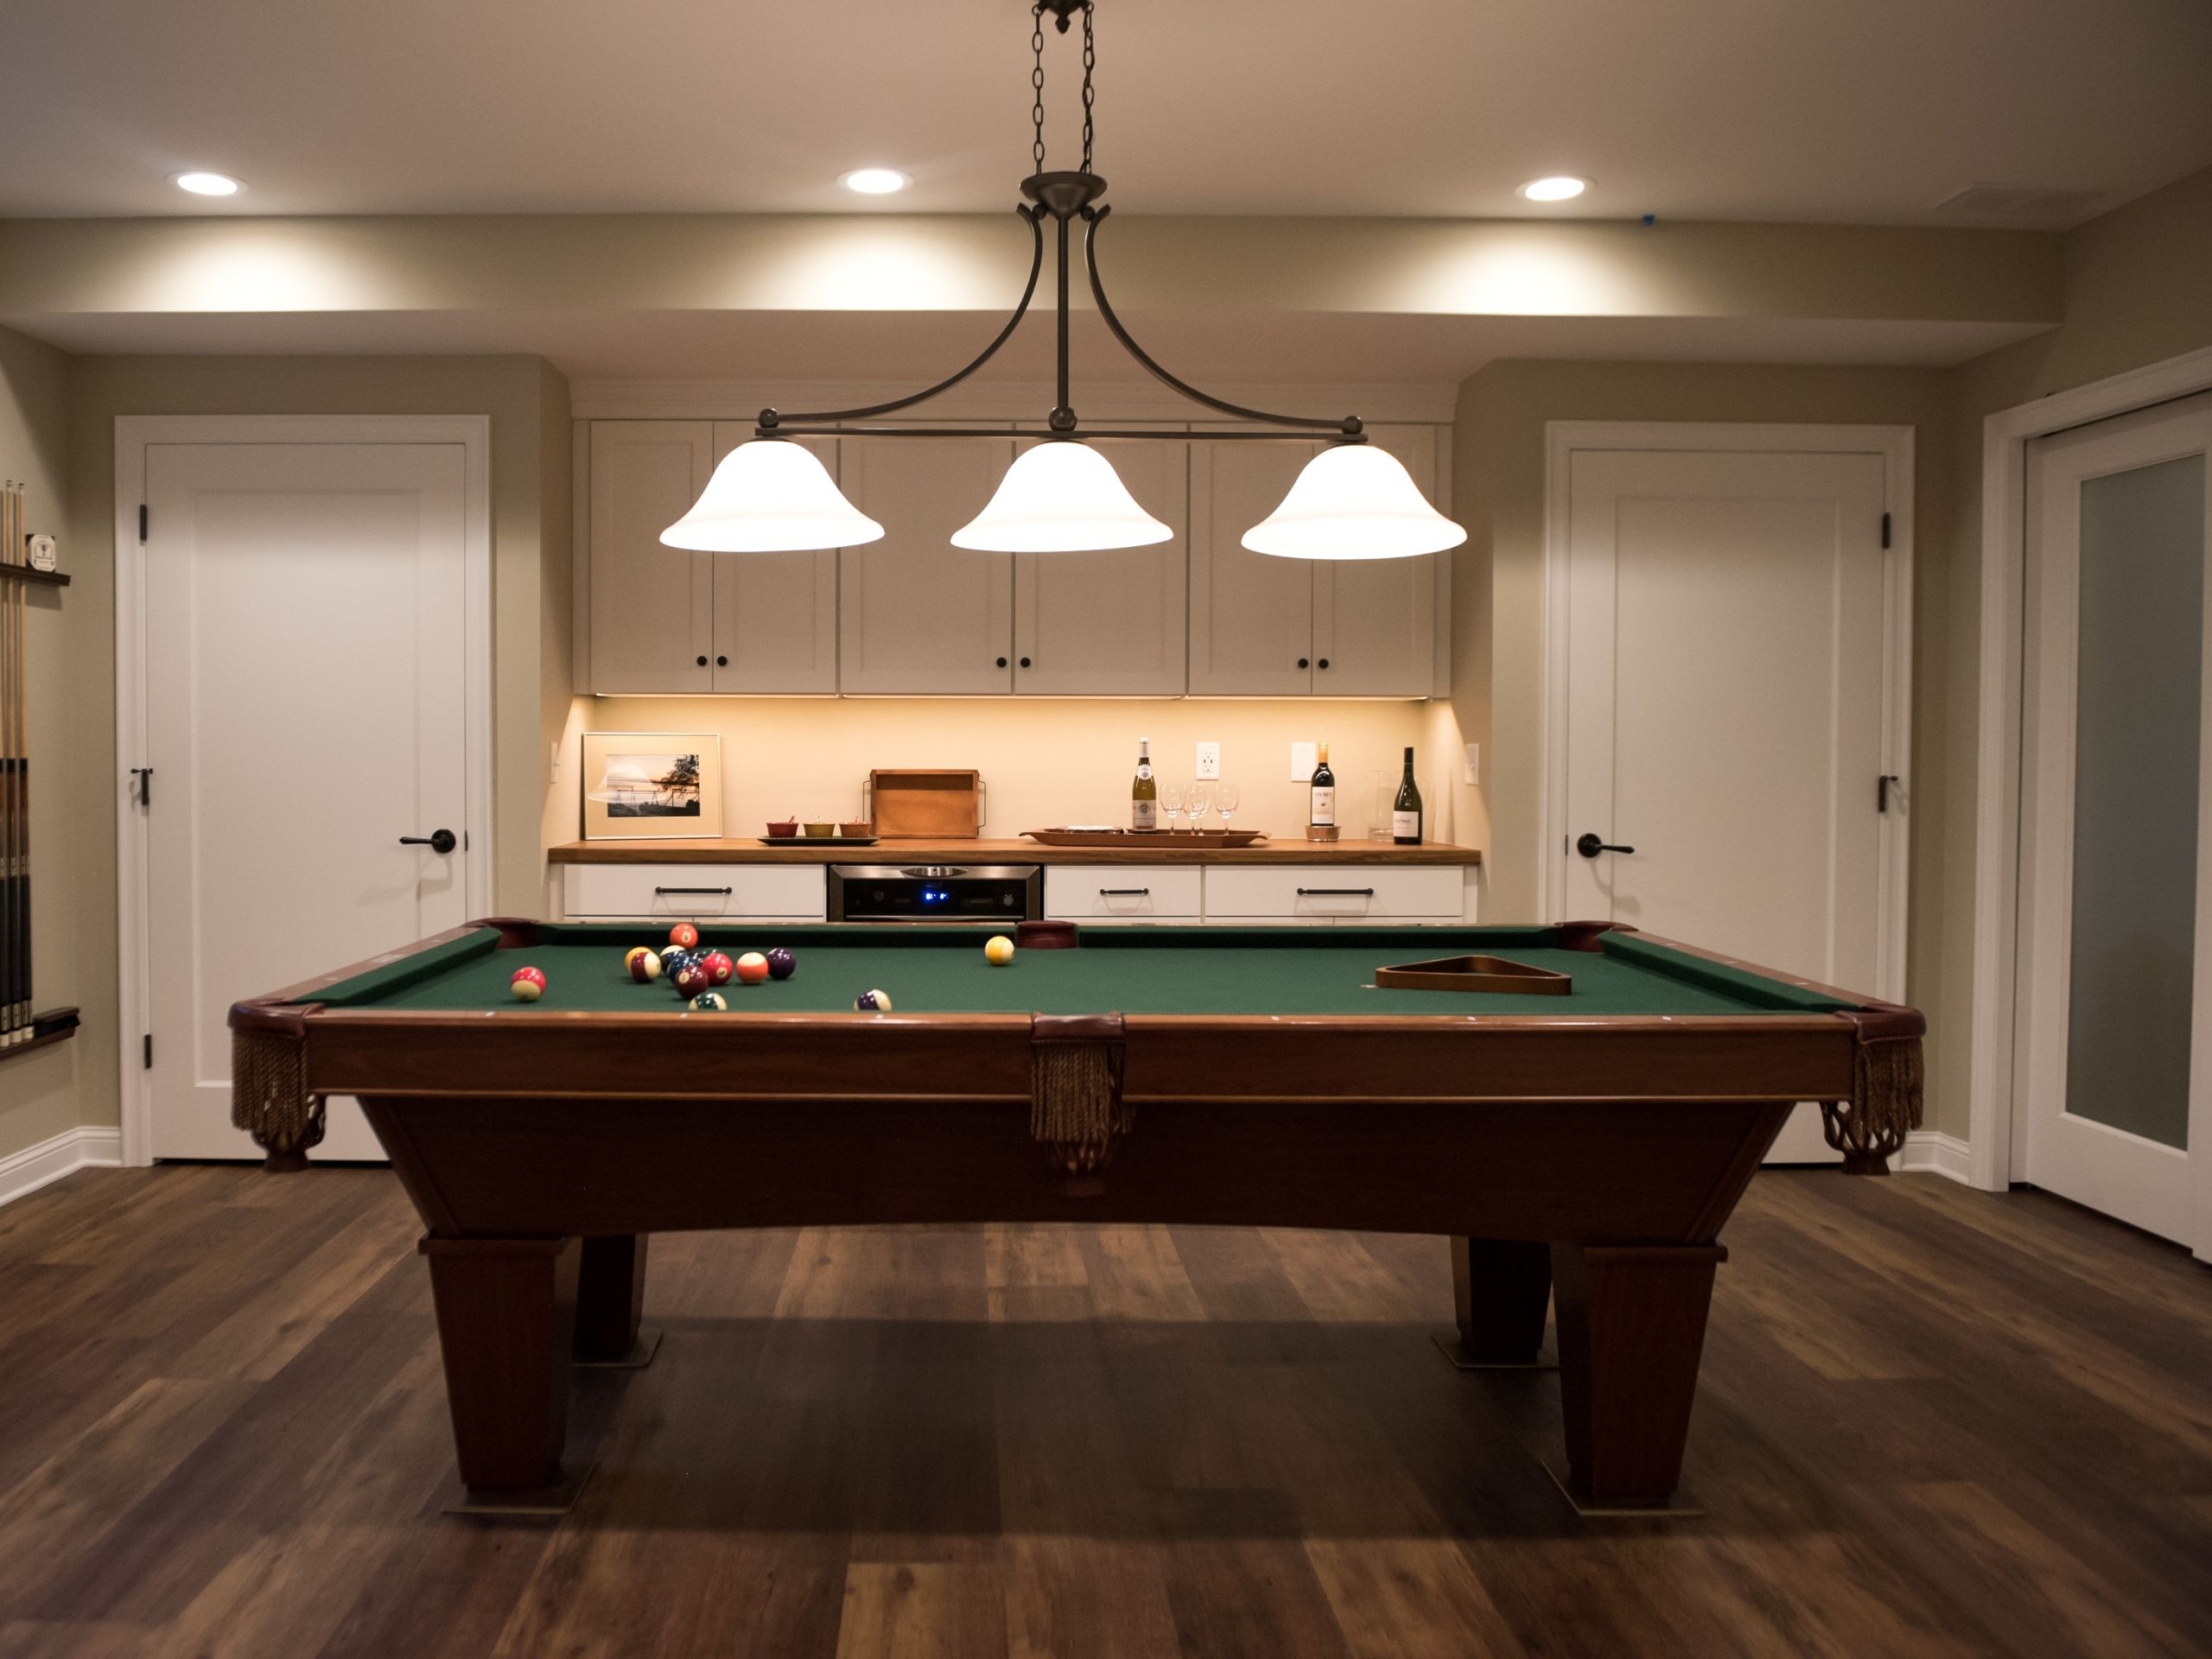 basement remodeling ideas: Basement pool table with wine bar in background and overhead light fixtures 